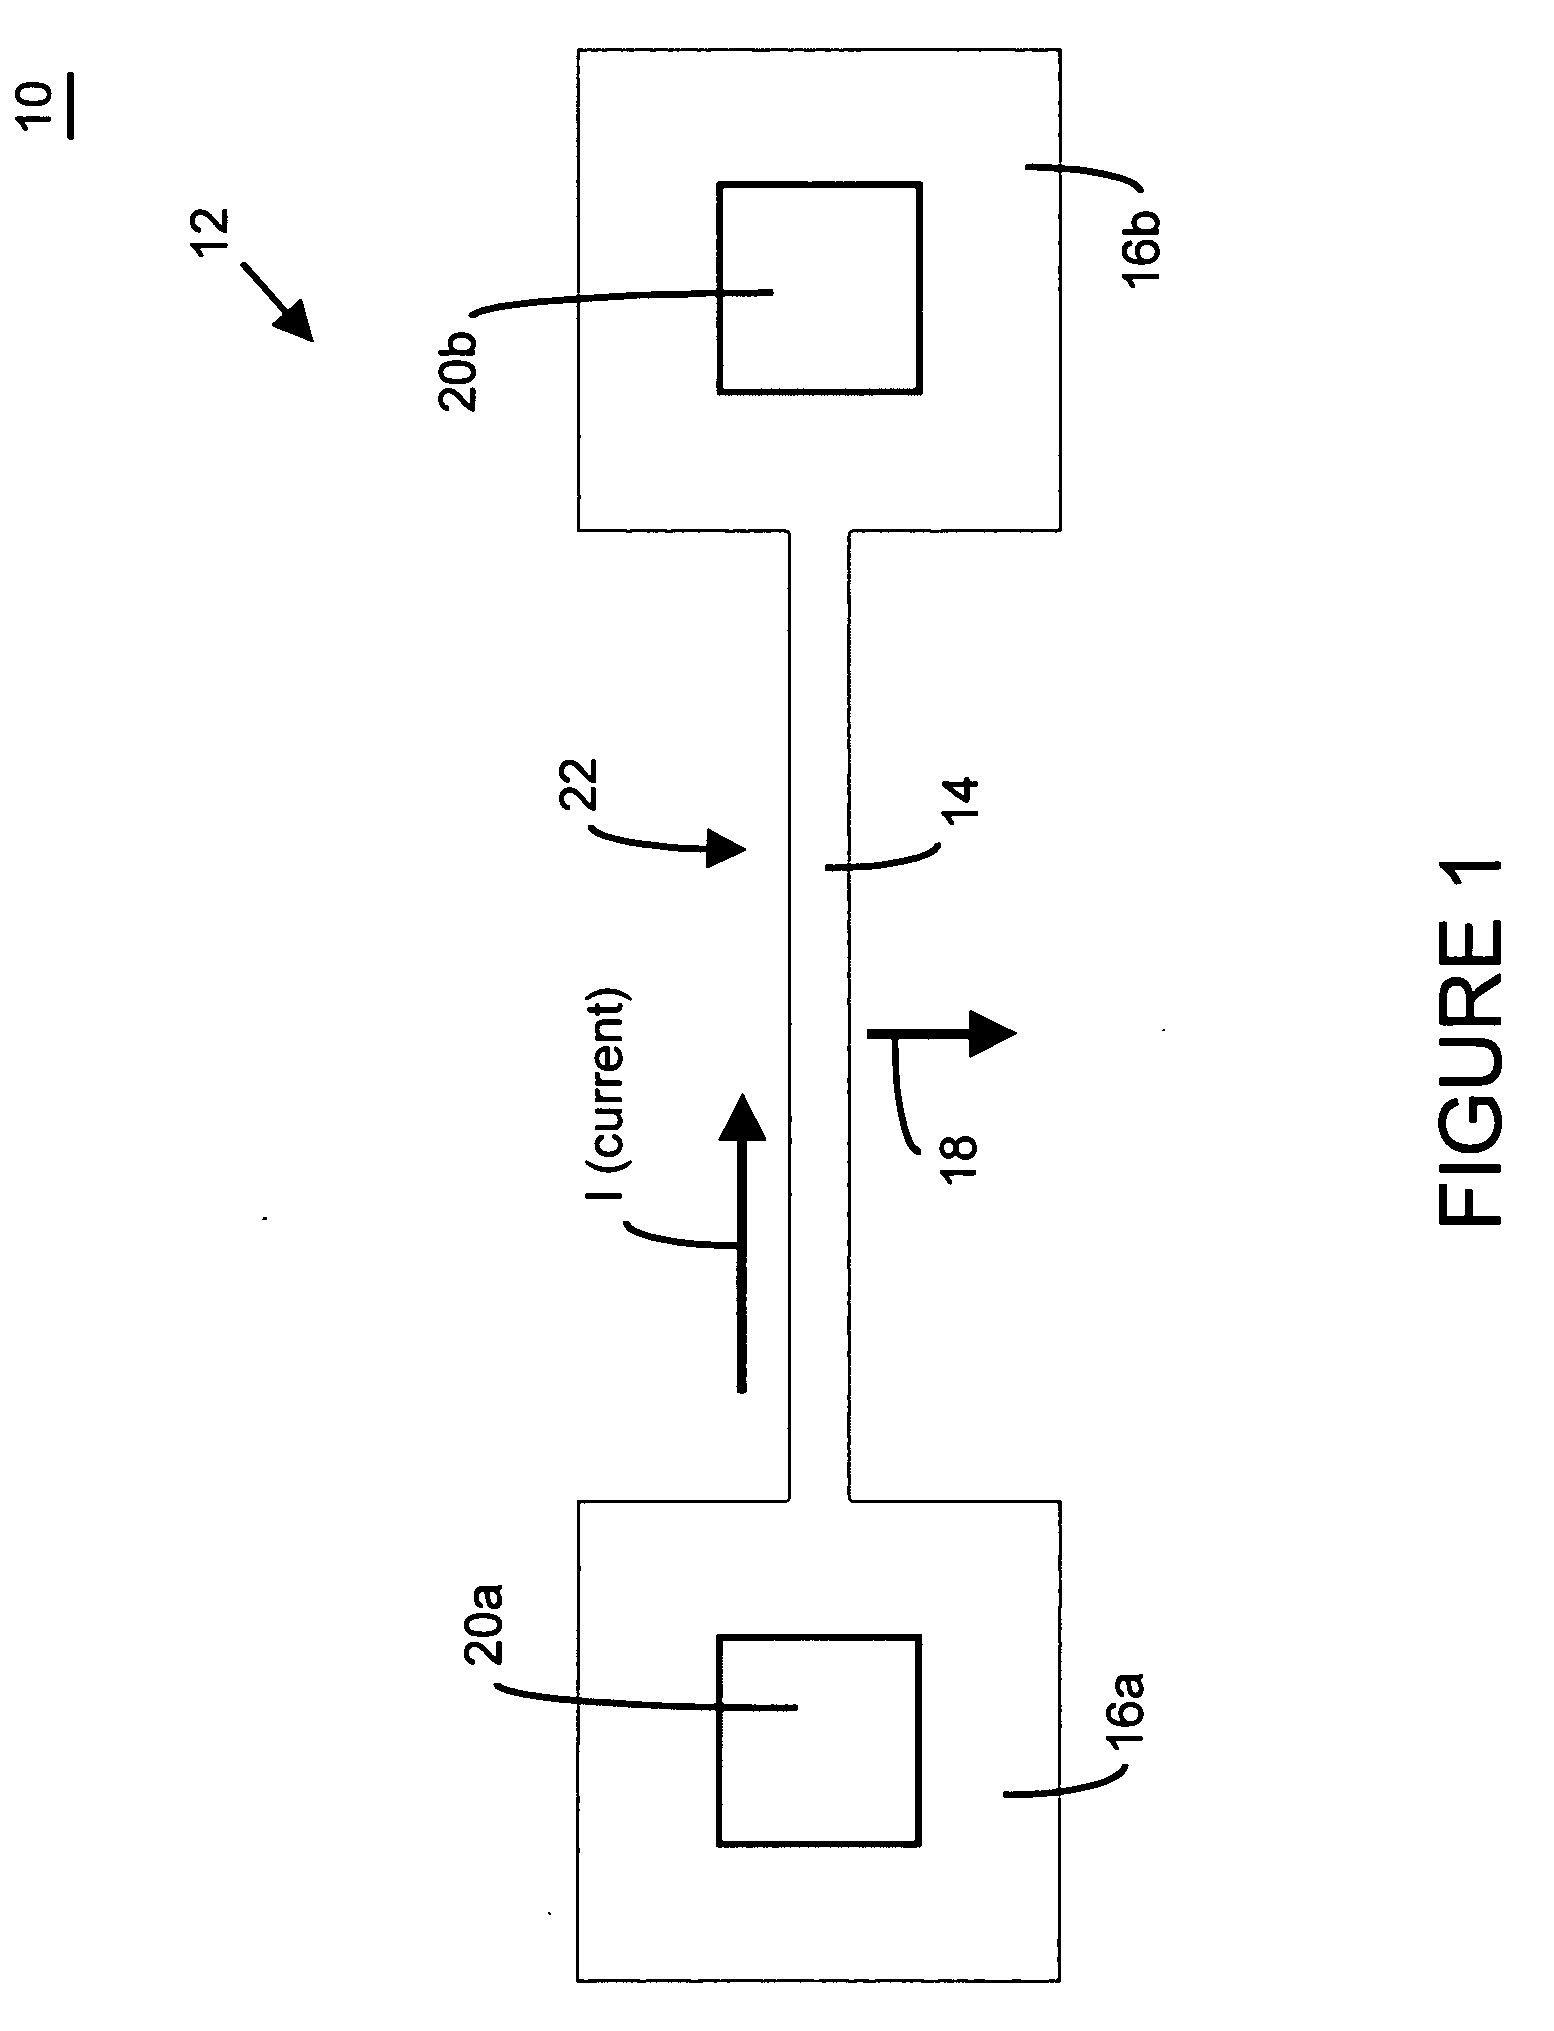 Temperature controlled MEMS resonator and method for controlling resonator frequency